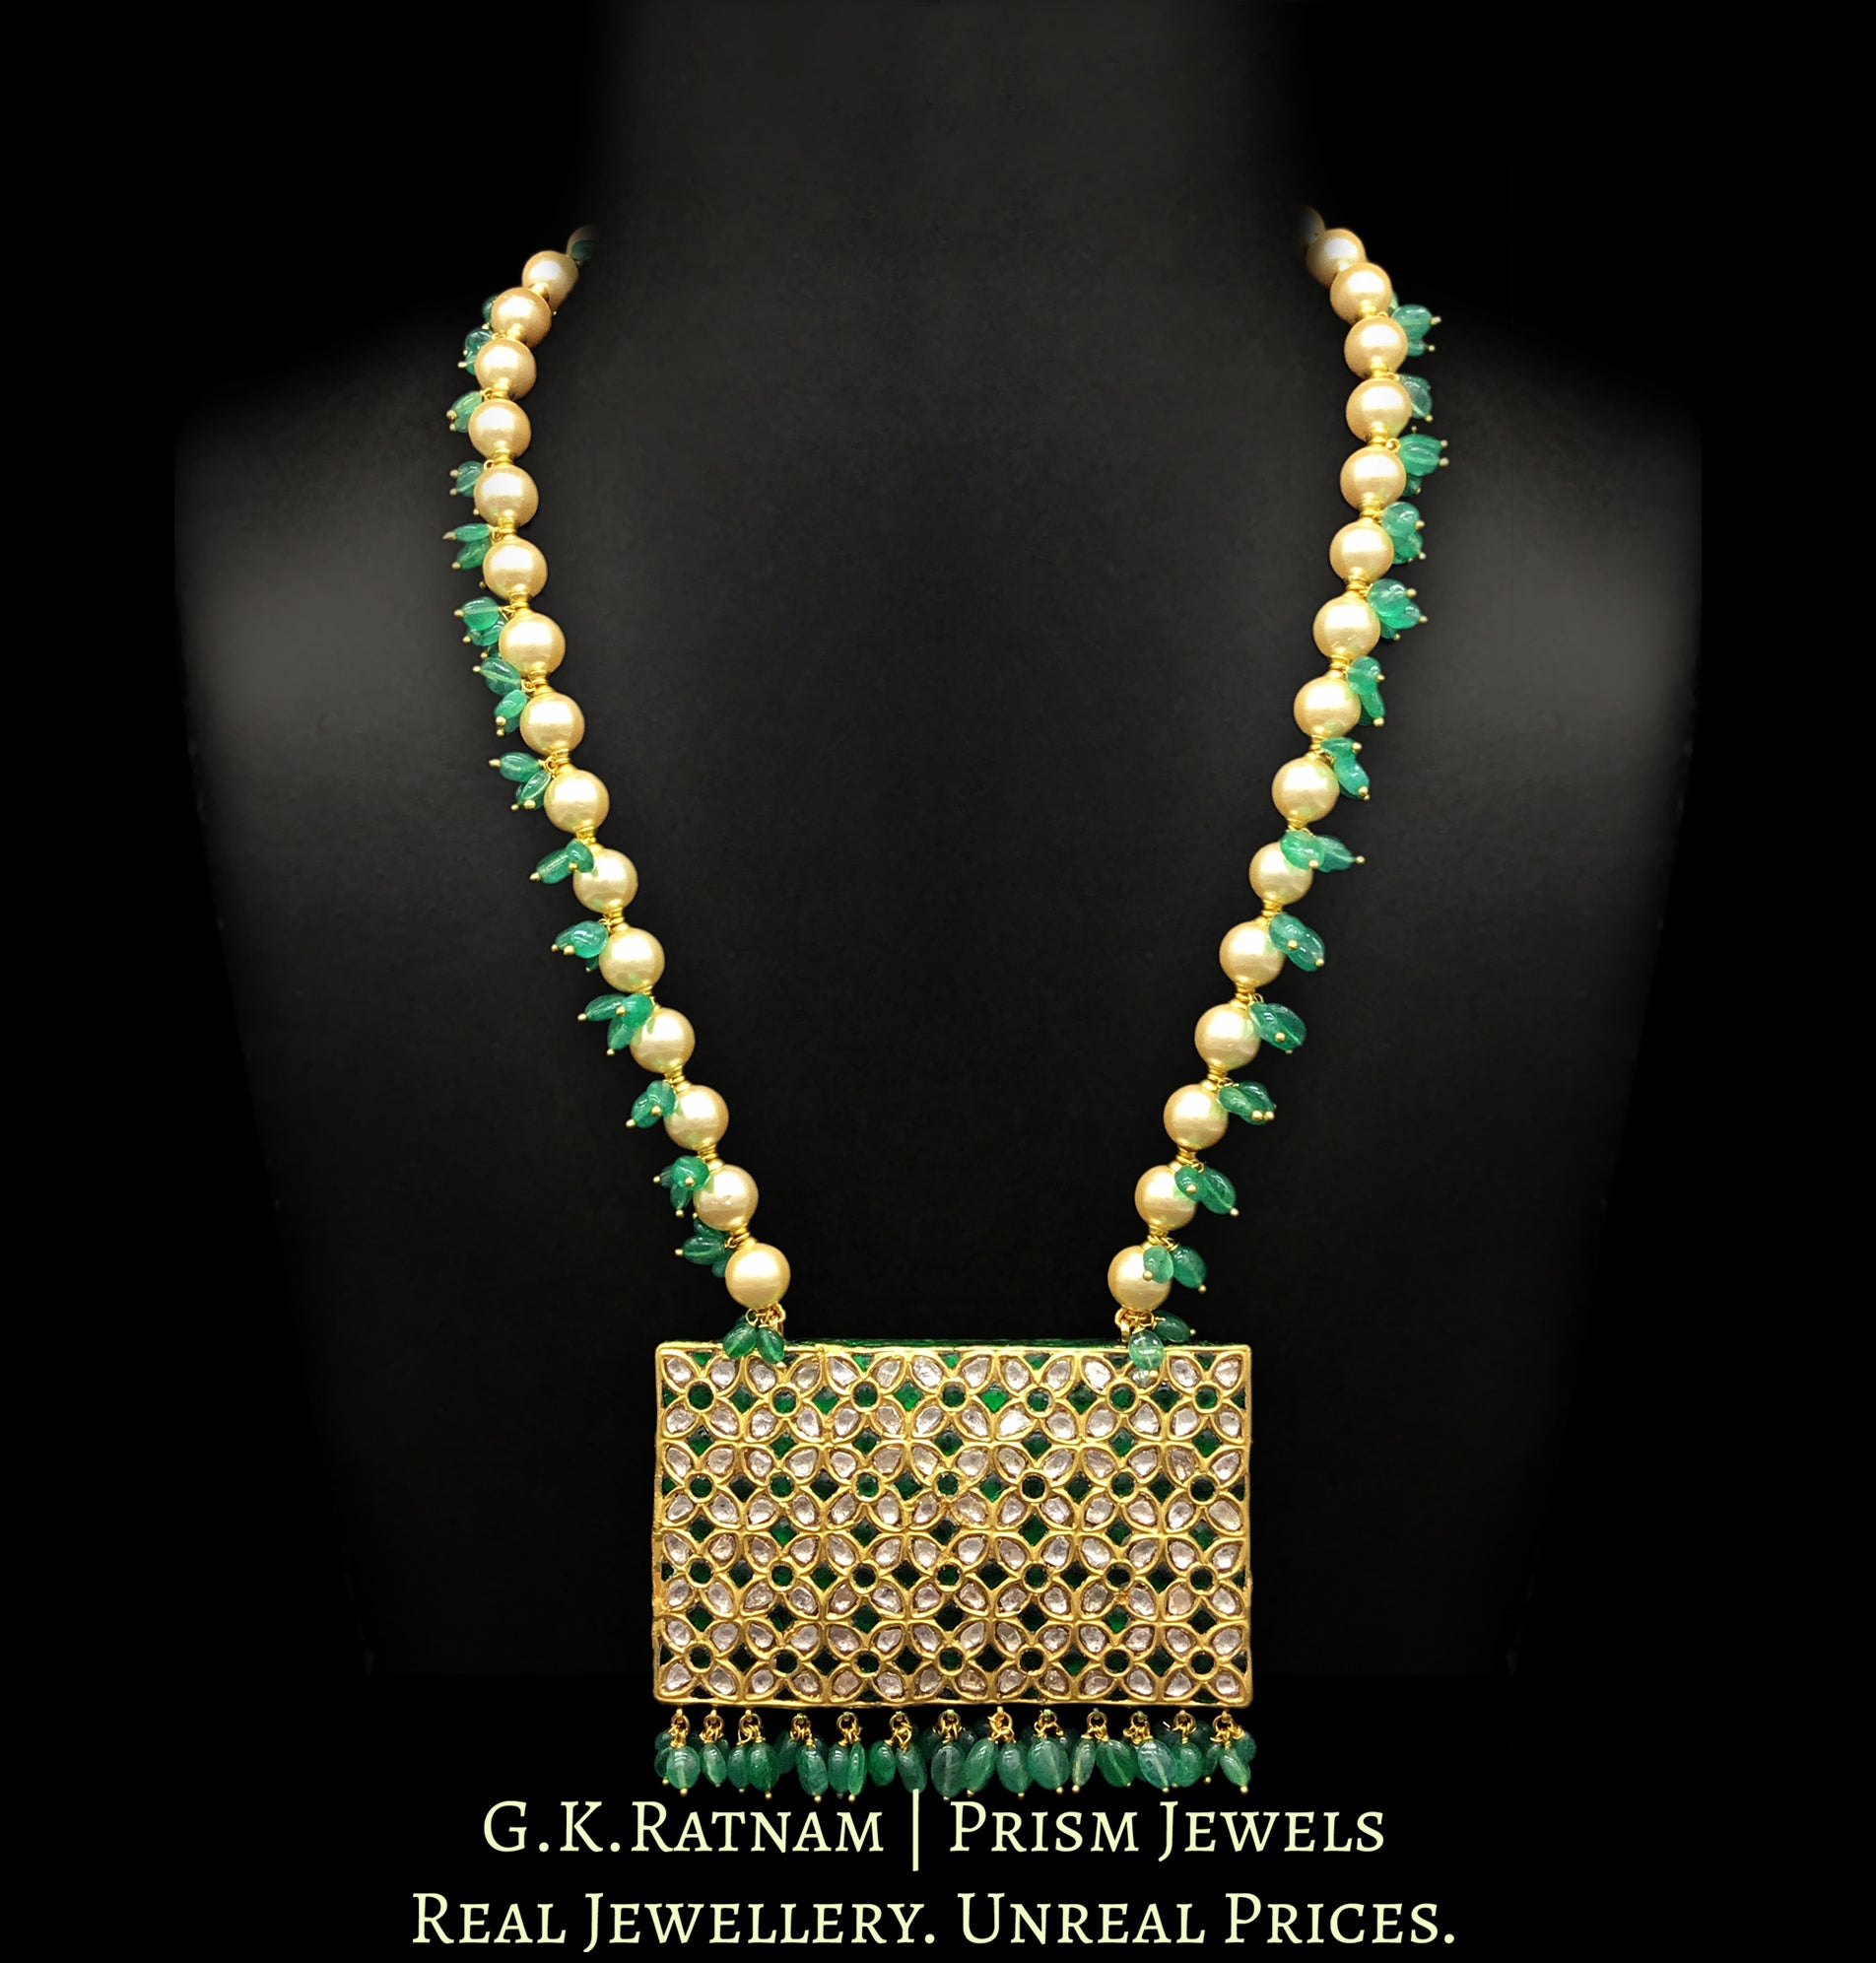 23k Gold and Diamond Polki green rectangle Pendant with pearls and green beryls